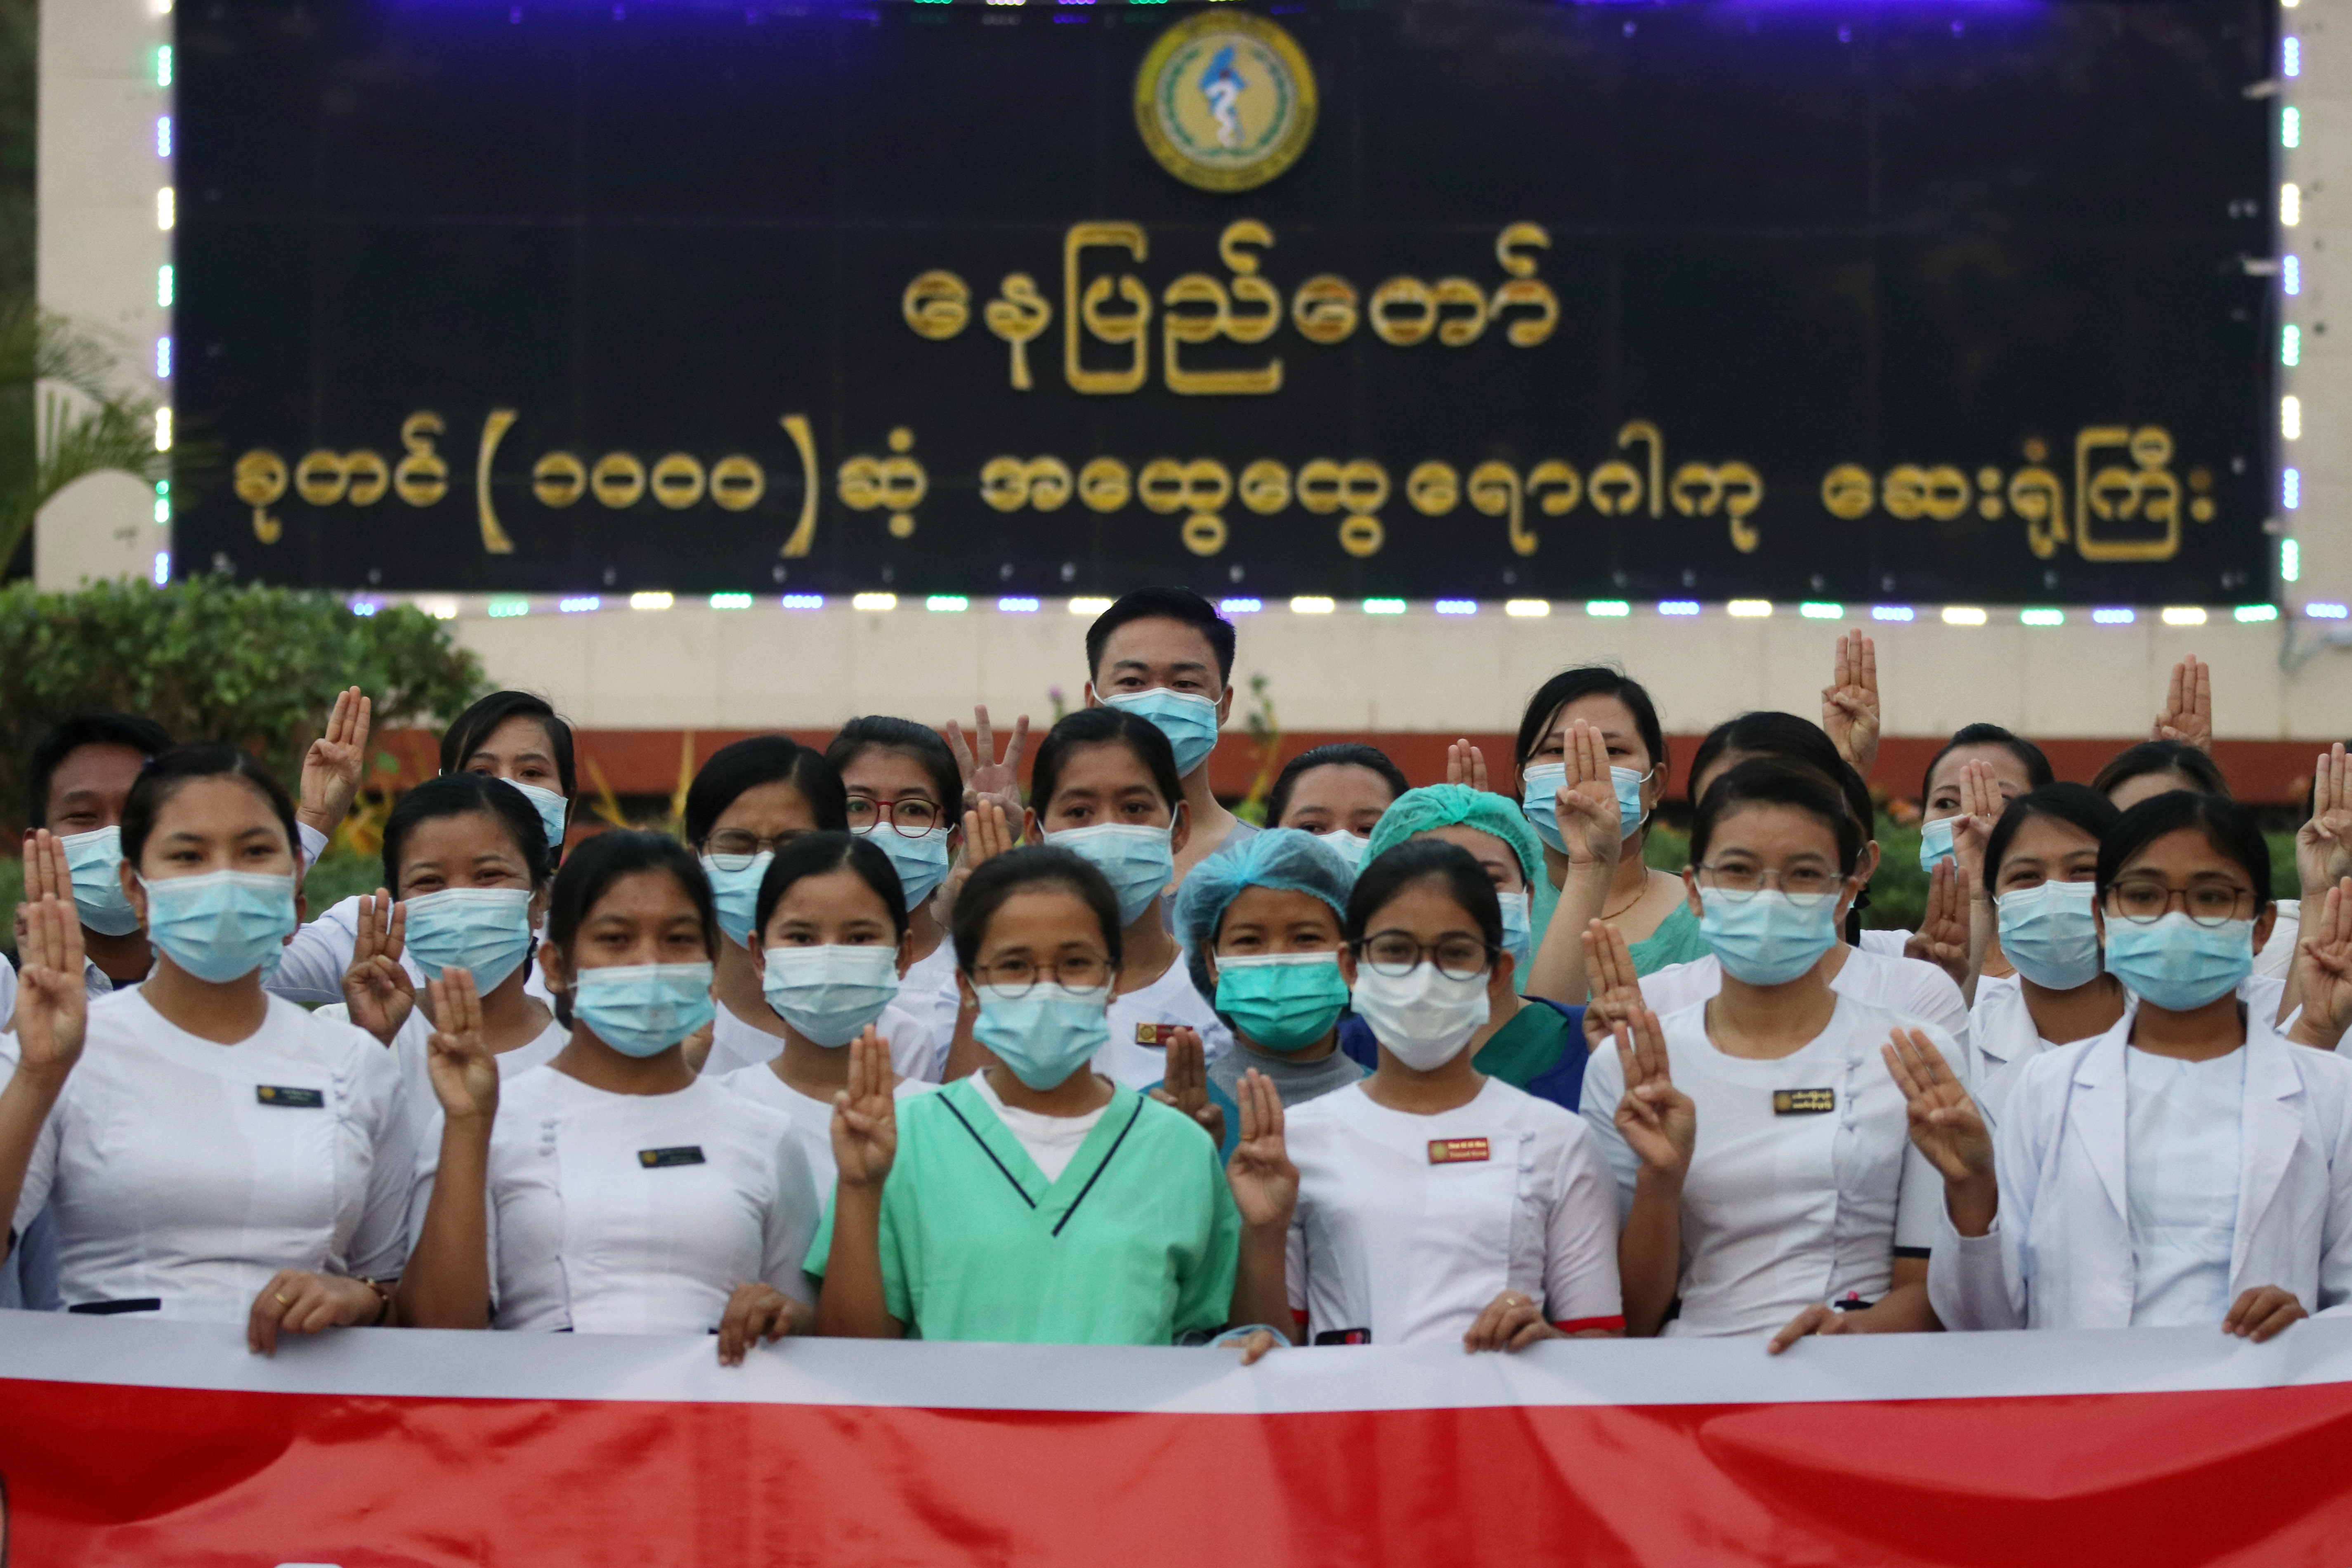 Medical staff hold up a three-finger salute as they pose for a photo in protest against the military coup at a hospital in Naypyidaw. (PHOTO: AFP)